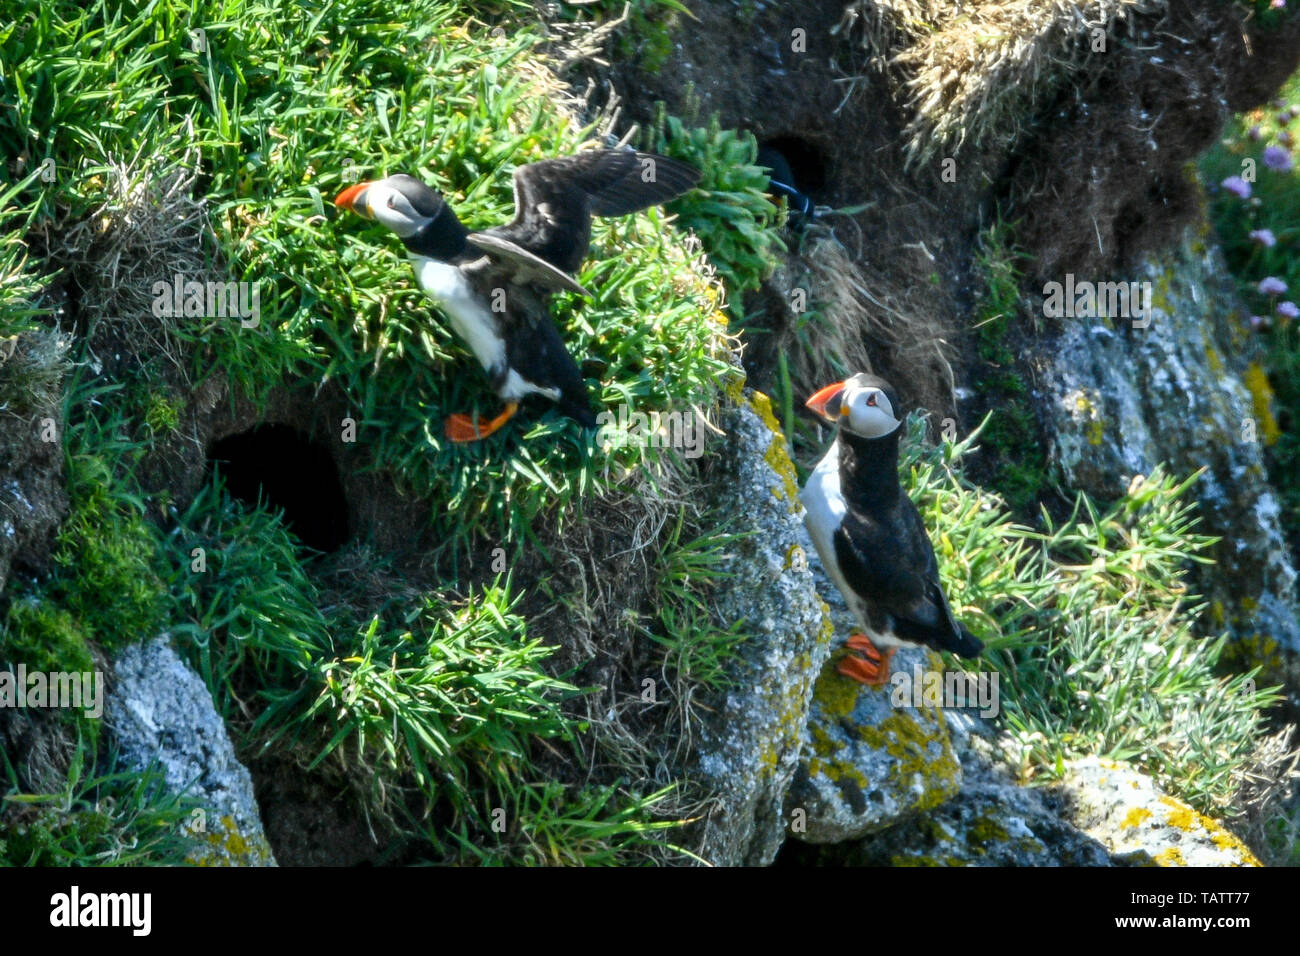 Puffins stay close to their burrows among the cliff faces on Lundy island in the Bristol Channel, off the coast of Devon, where a study led by the RSPB has revealed that total seabird numbers on the island have tripled in the past 15 years to over 21,000 birds. Stock Photo